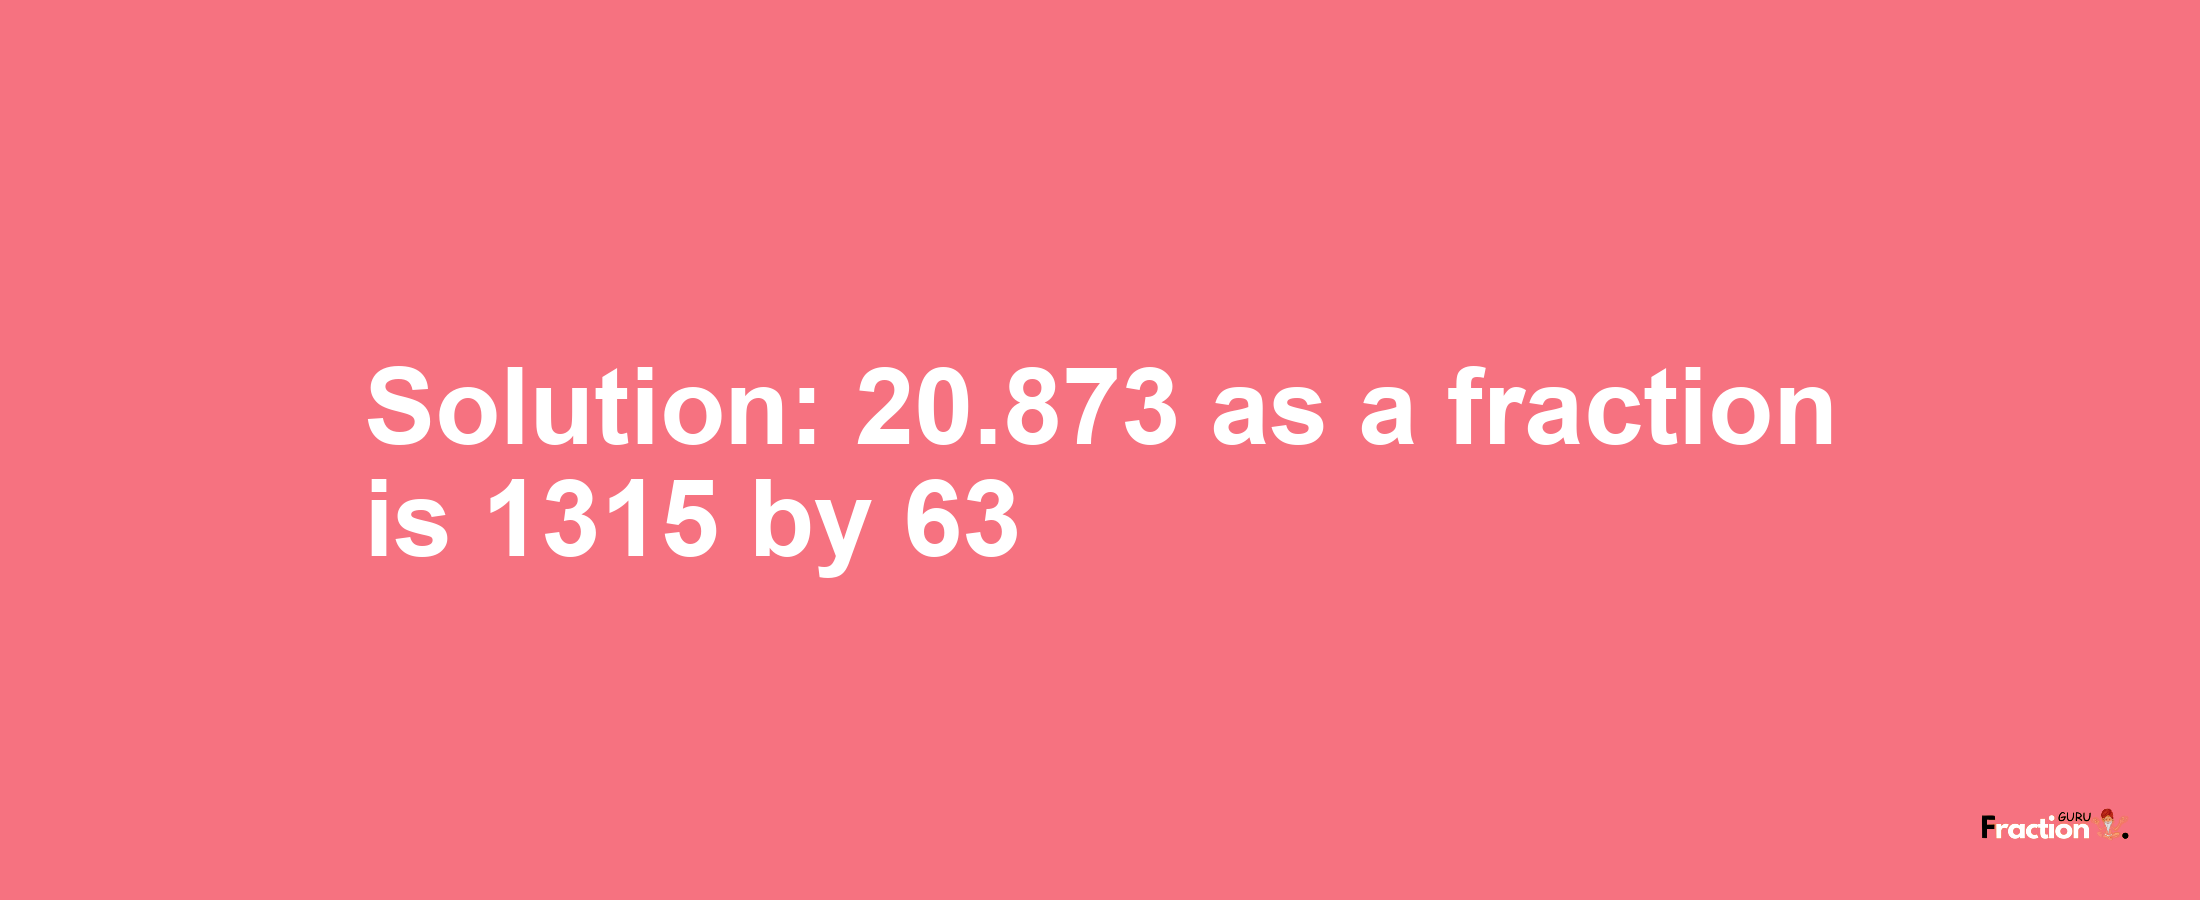 Solution:20.873 as a fraction is 1315/63